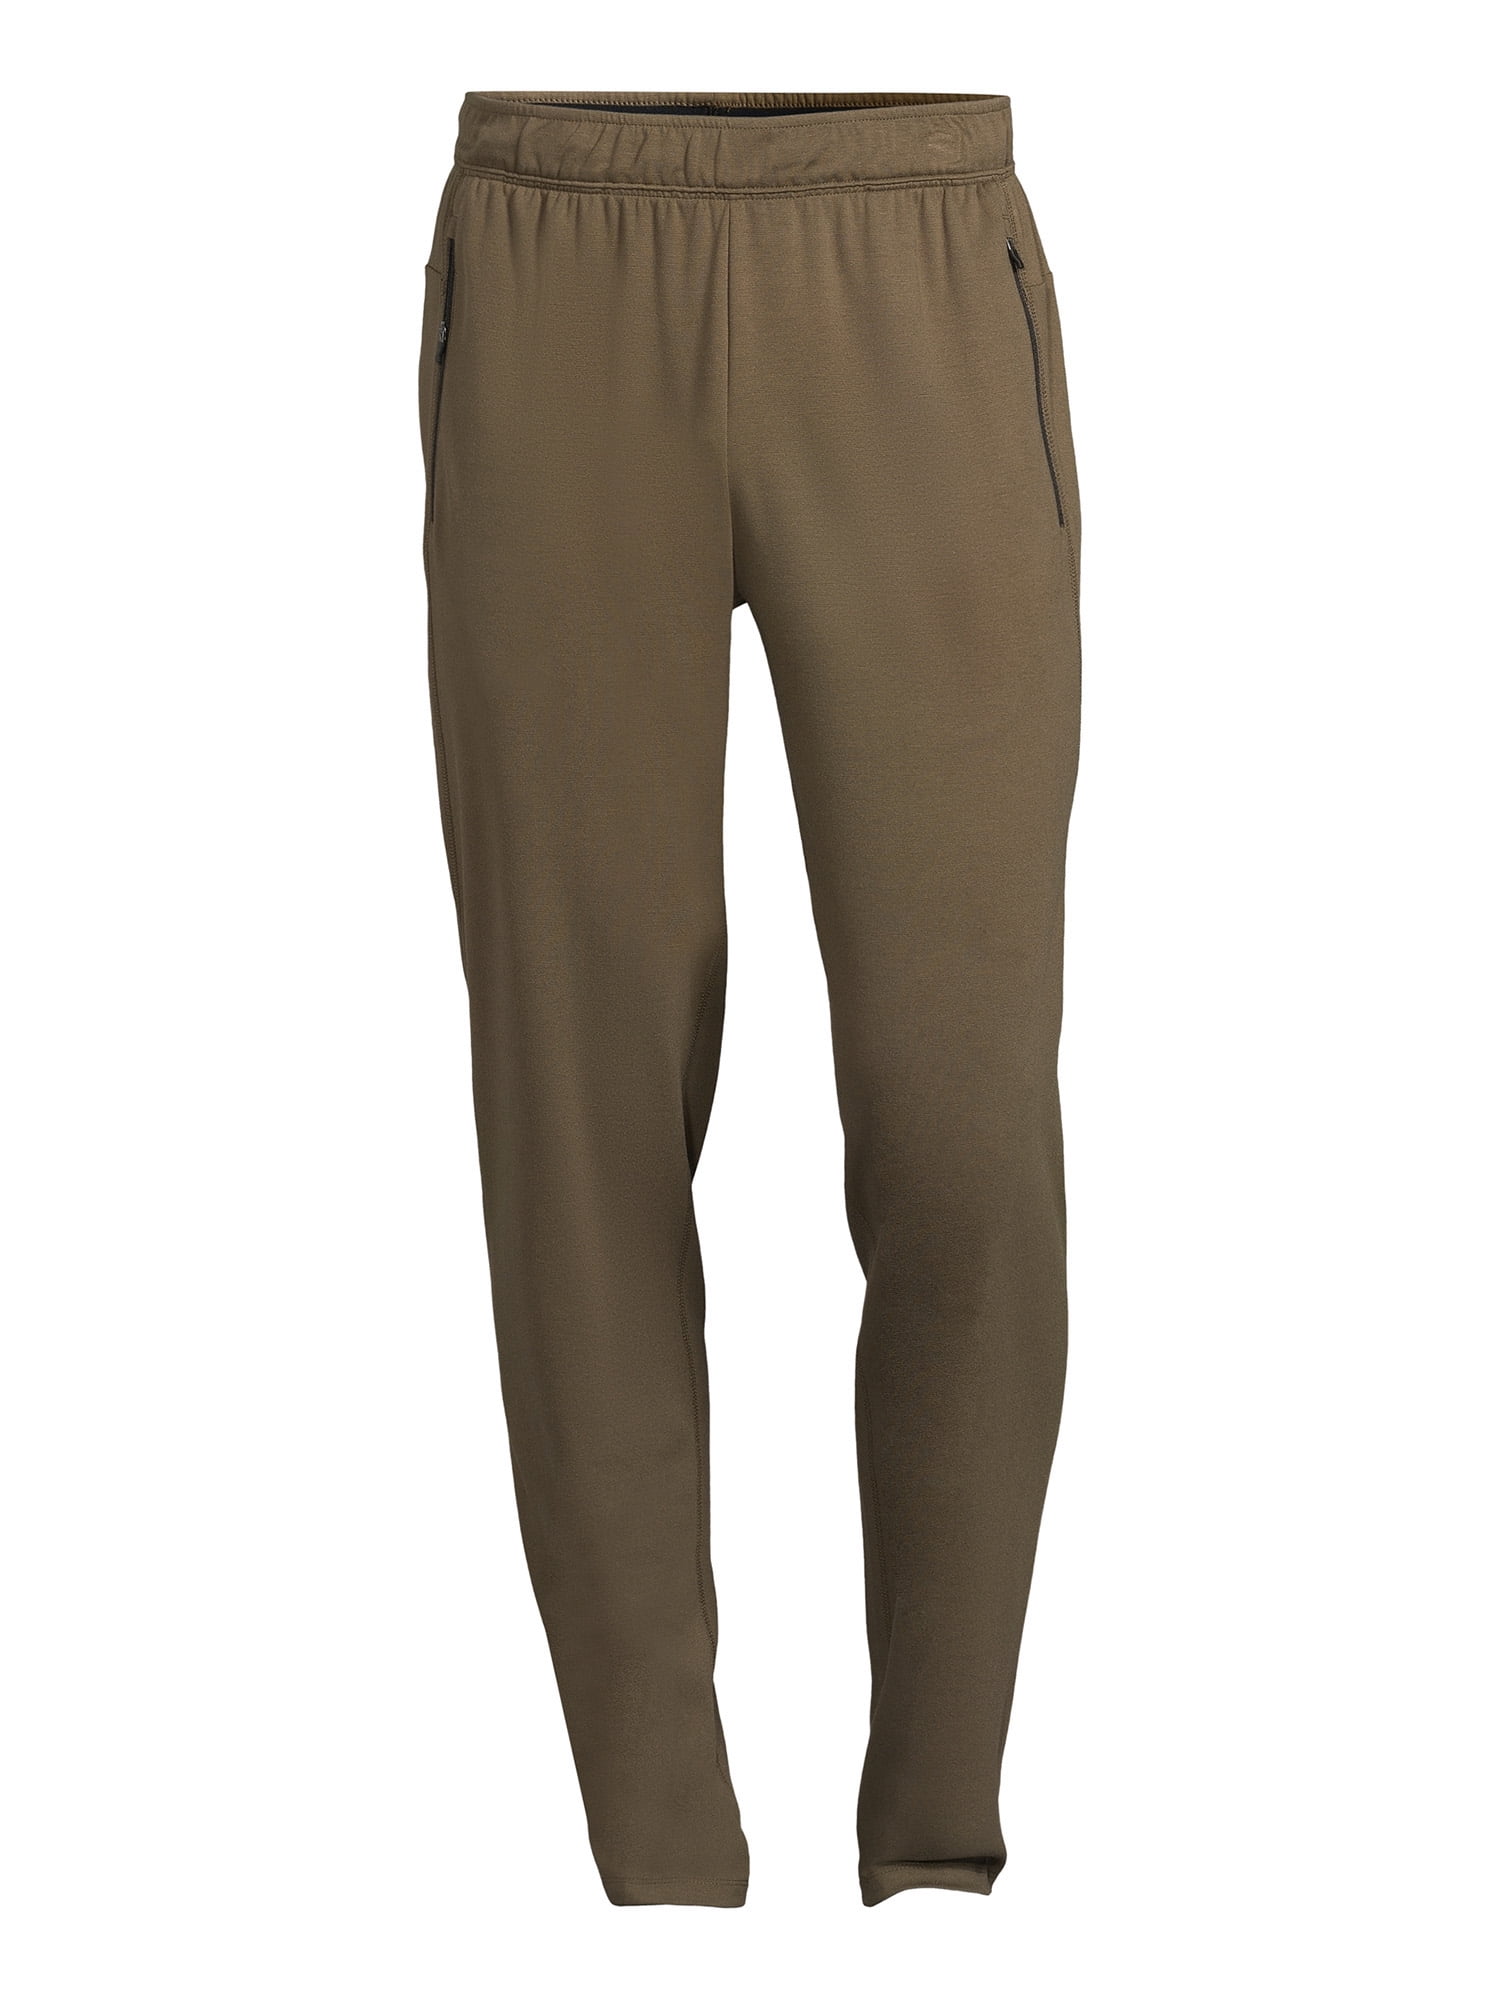 Athletic Works Men's Tennis Pants, Sizes up to 3XL